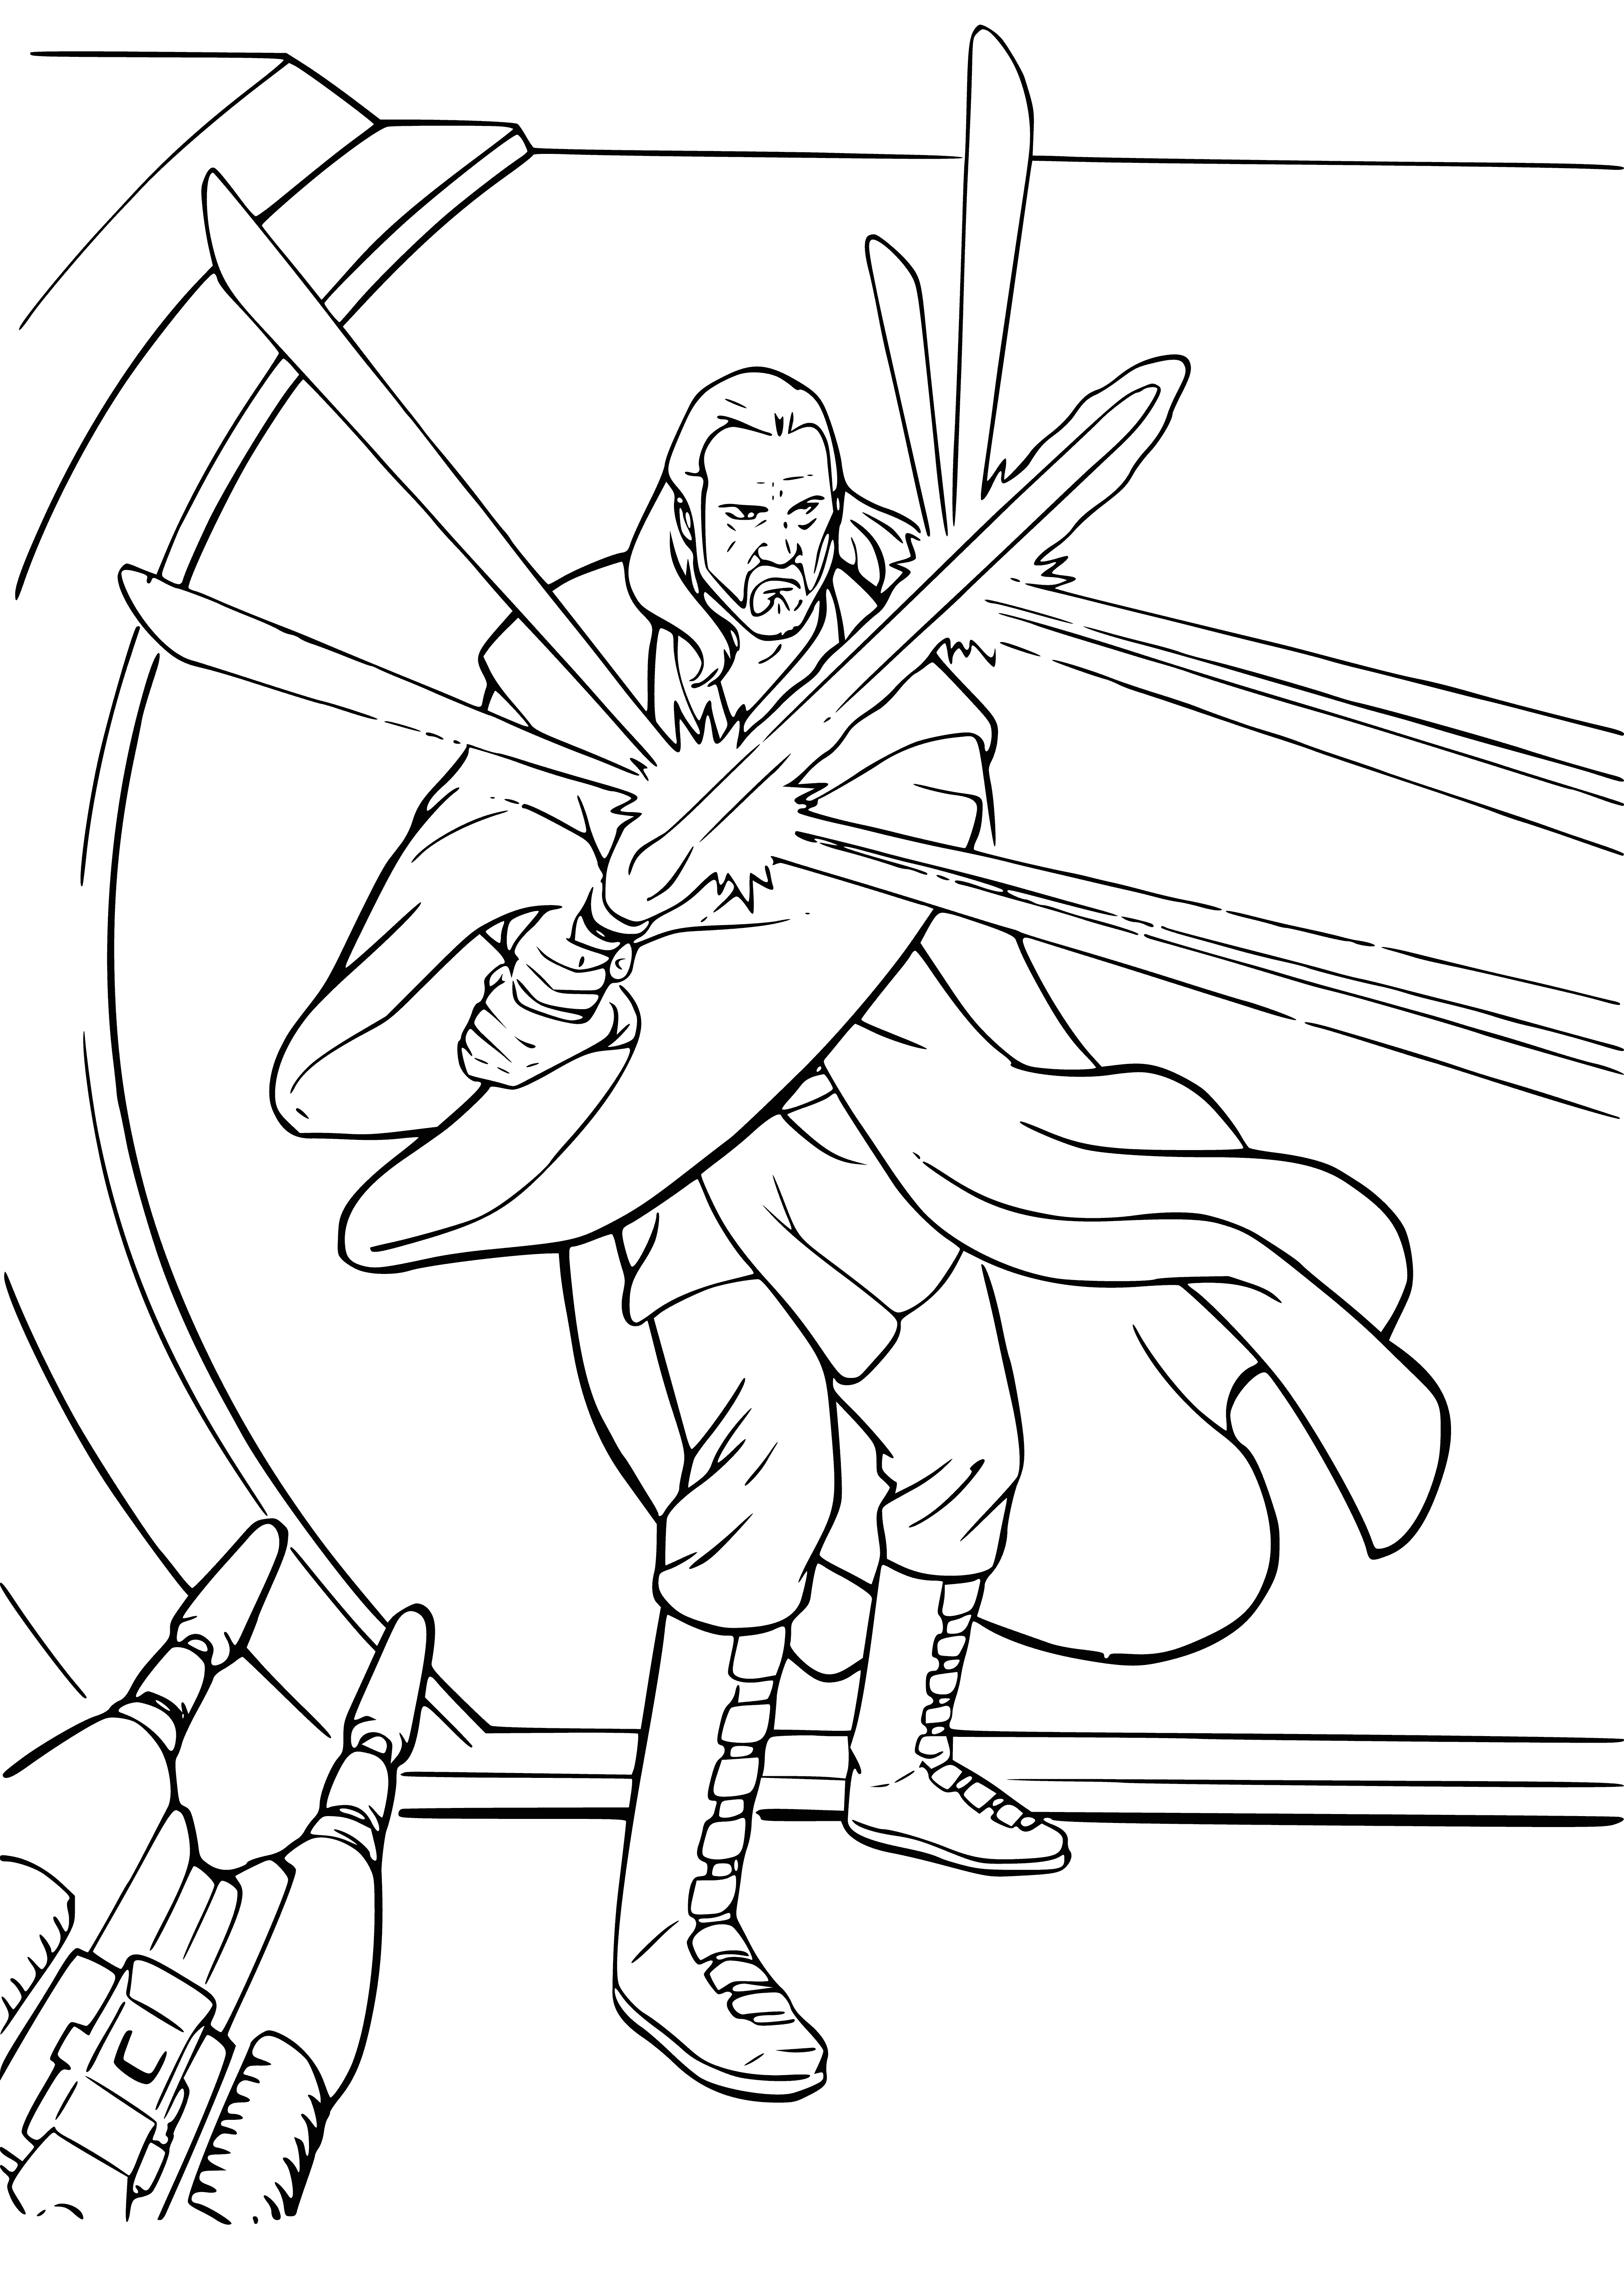 coloring page: Man with Lightsaber wearing cloak and shirt, two-mooned planet in background.